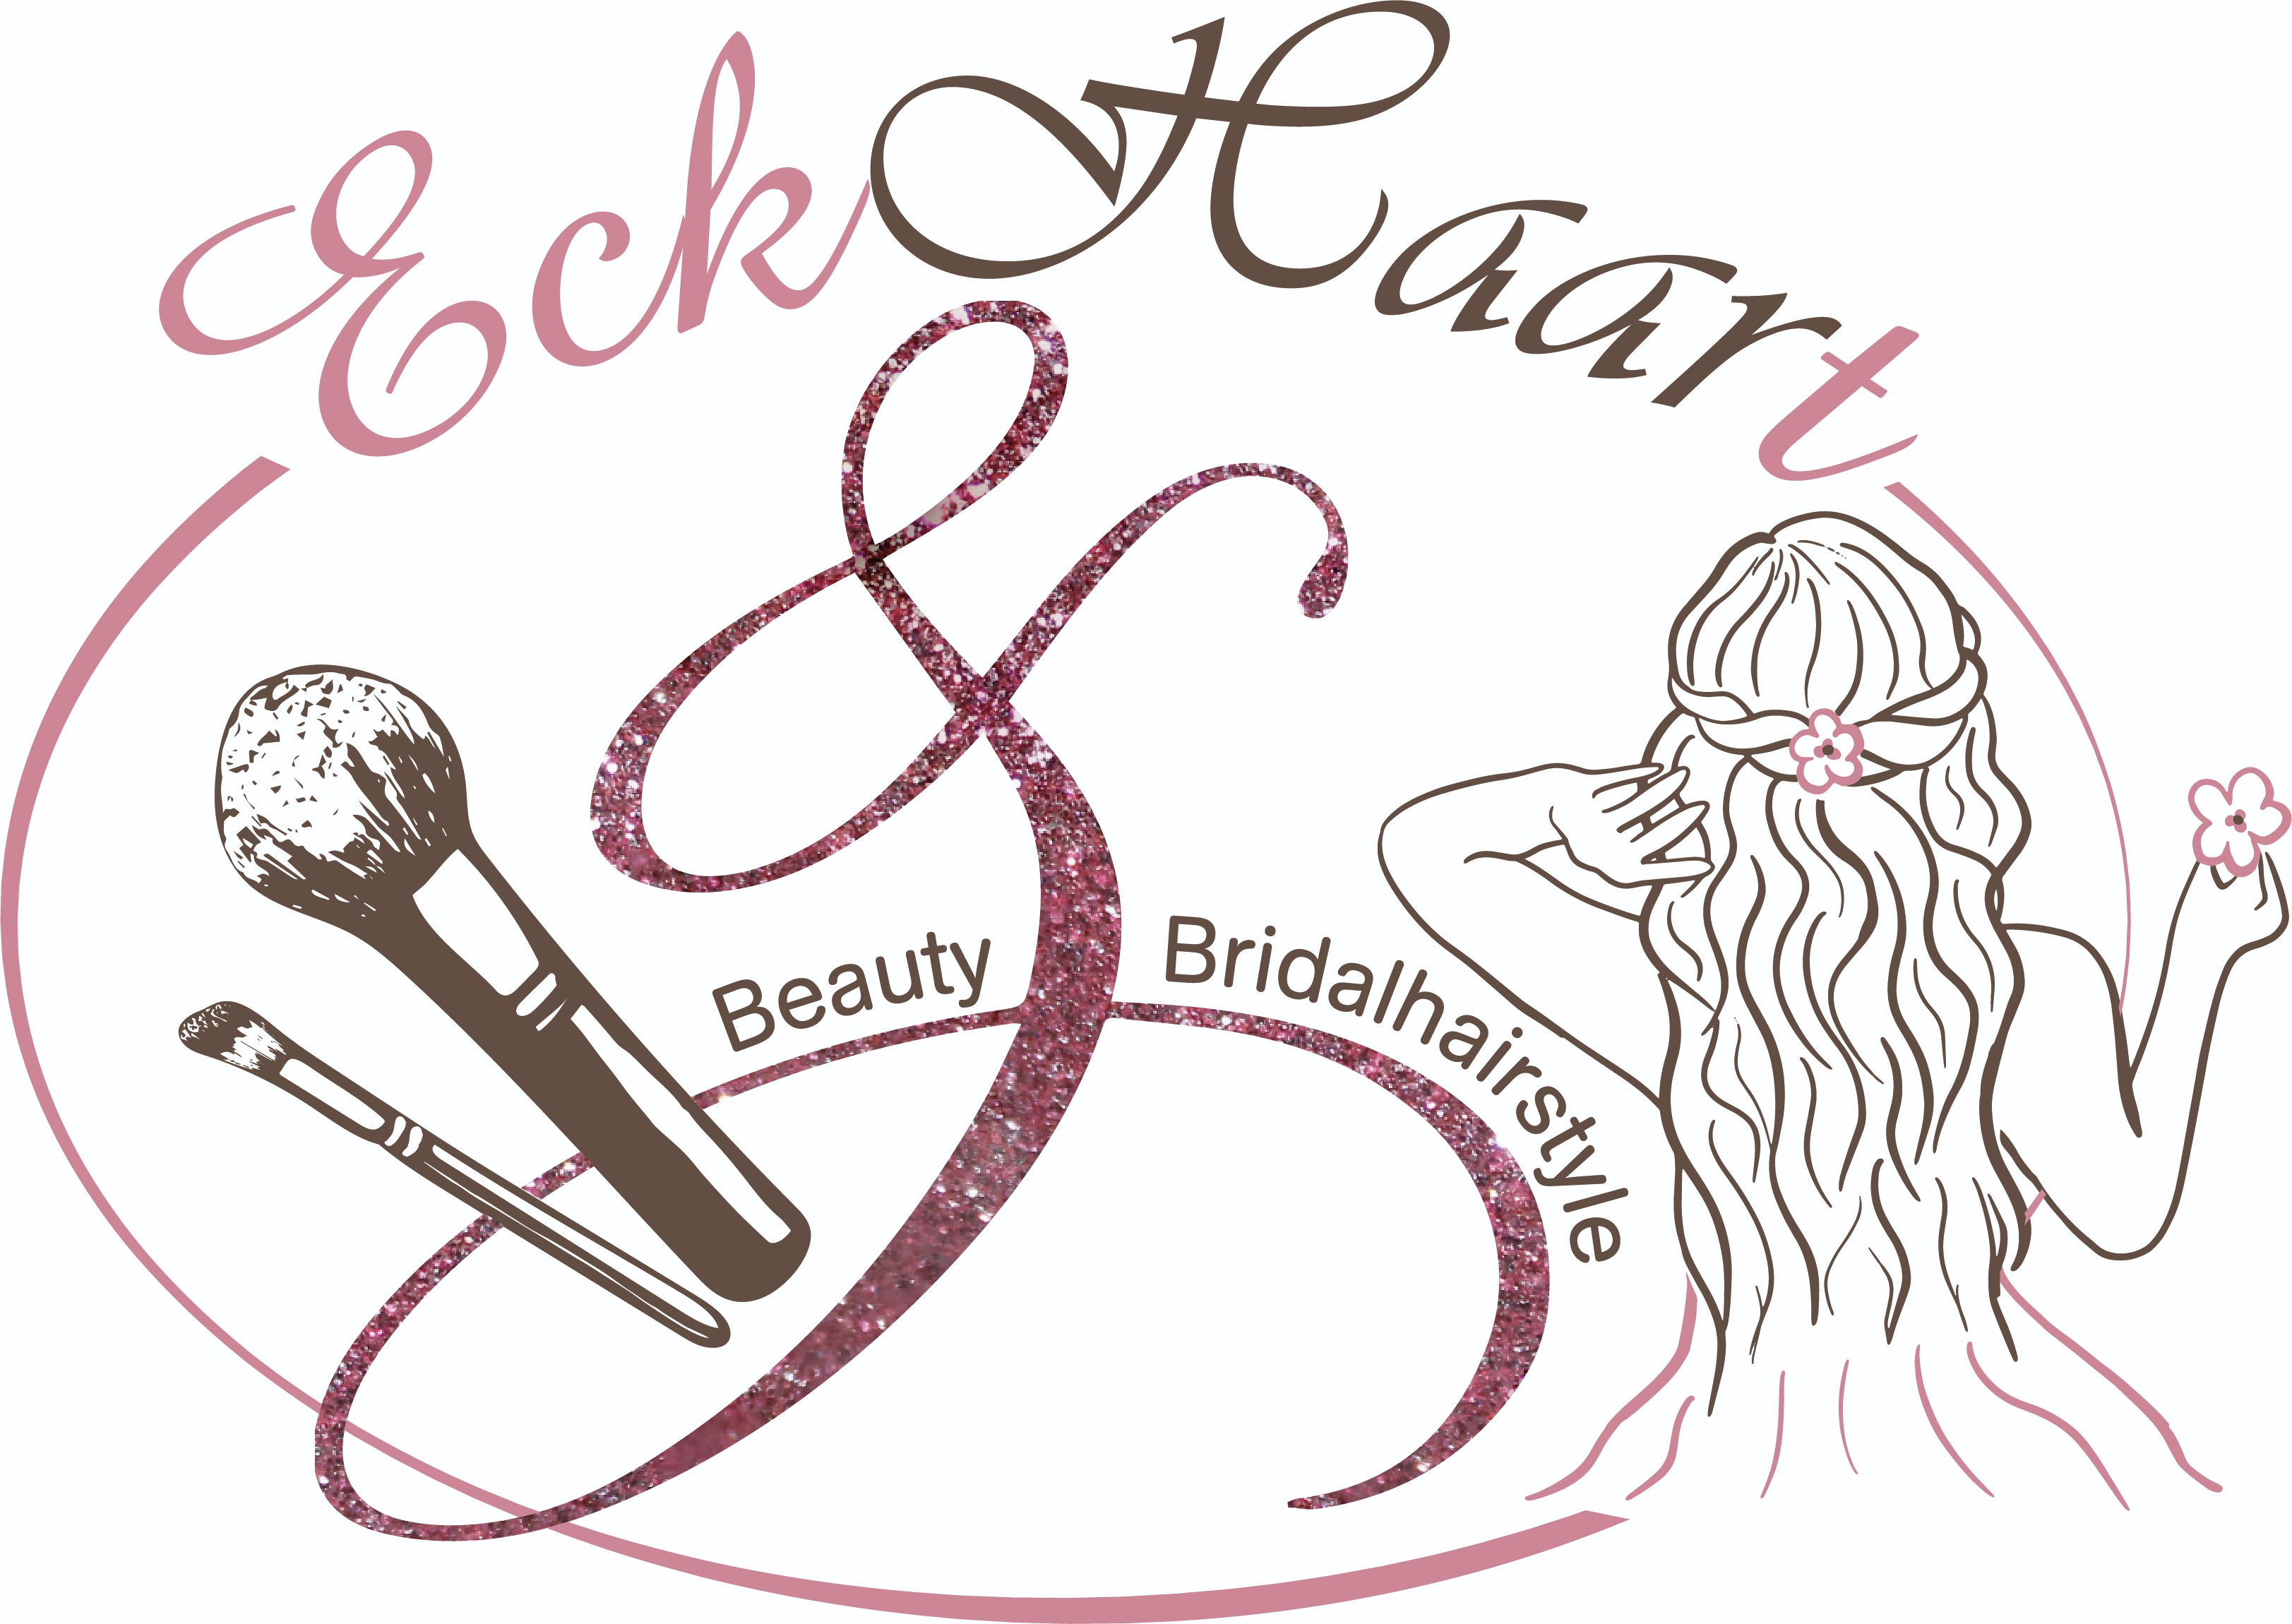 EckHaart Hairstyle&Beauty